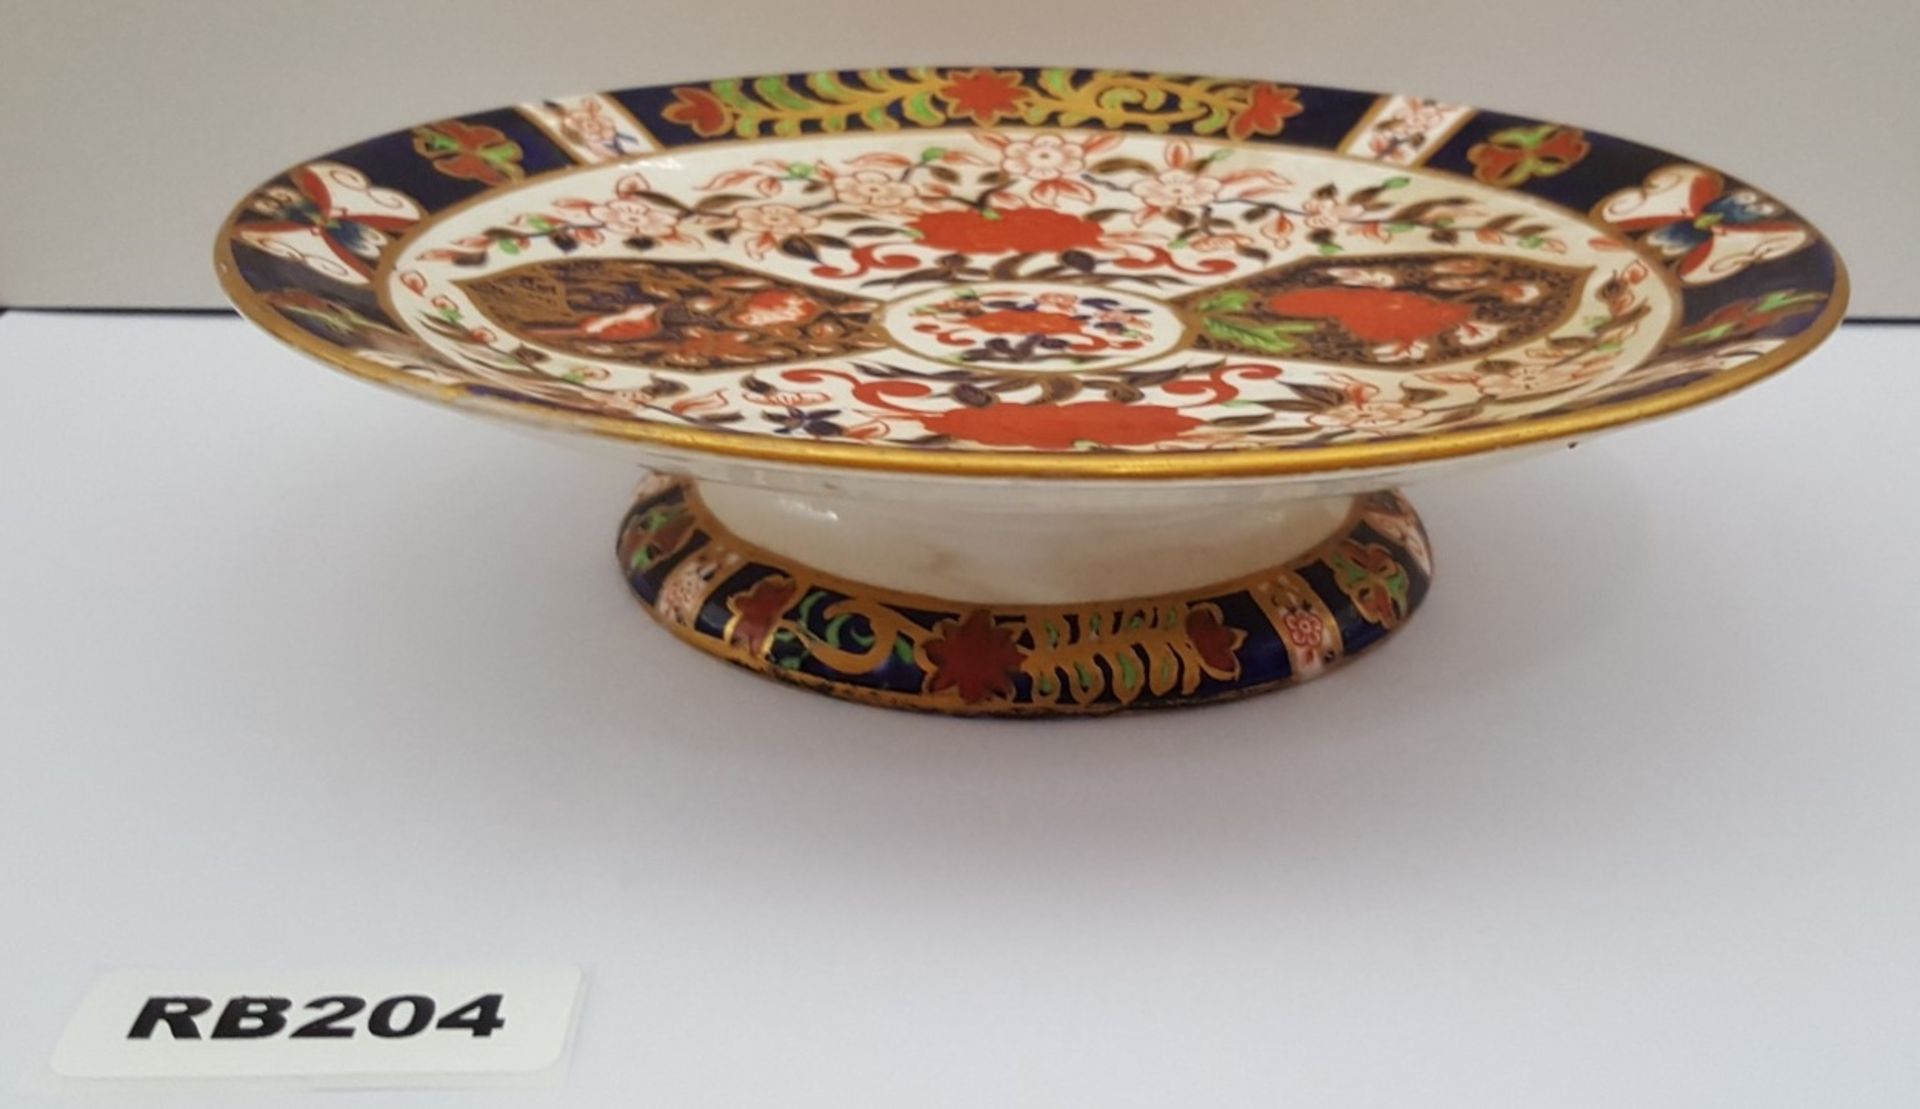 1 x RARE ROYAL CROWN DERBY IMARI PATTERN 198 CHINA PLATE - Ref RB204 I - Image 5 of 6